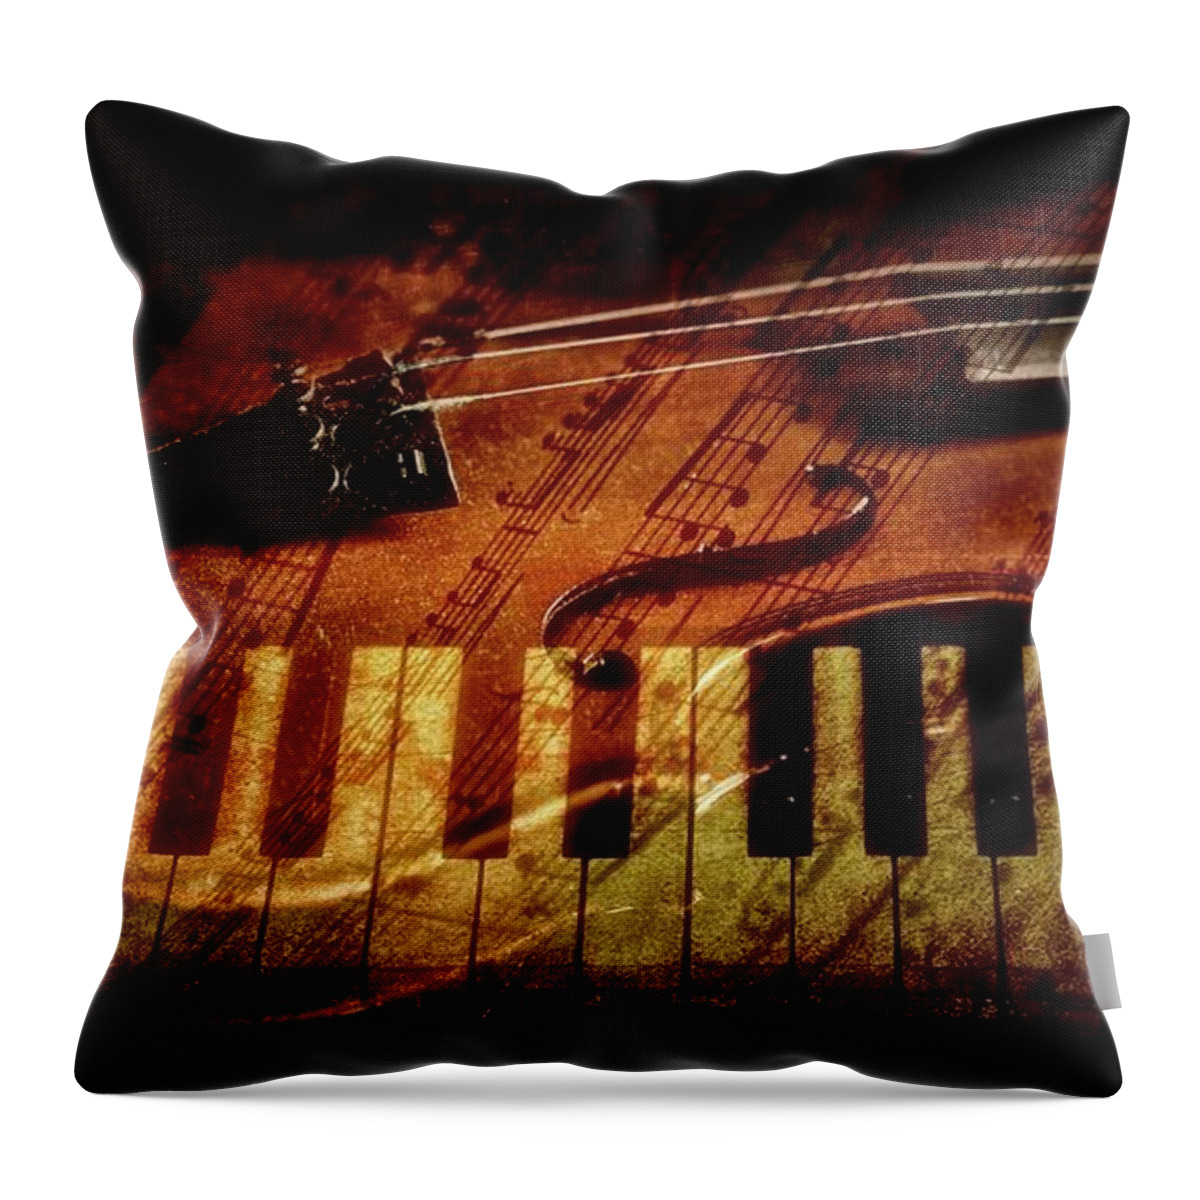 Classical Music Throw Pillow featuring the photograph Classical Music For Piano And Violin by James DeFazio